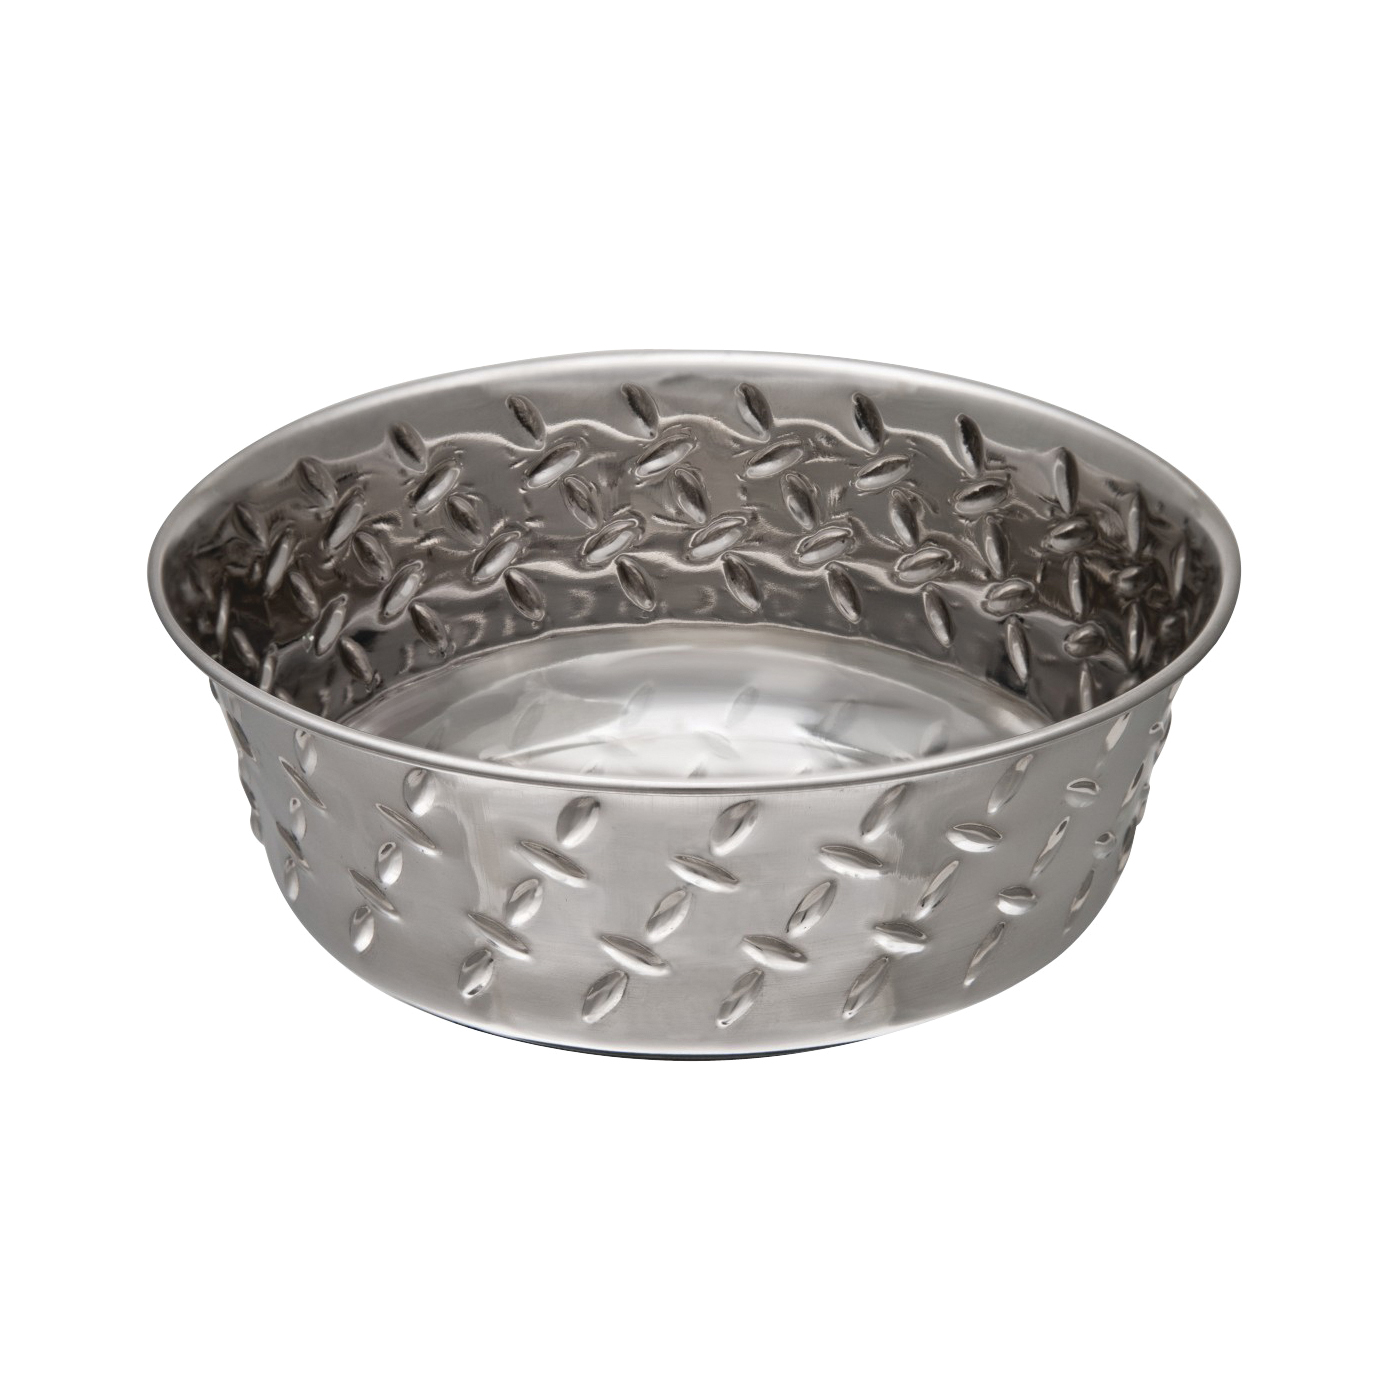 7255 Pet Feeding Dish, M, 1 qt Volume, Rubber Base/Stainless Steel Body, Silver